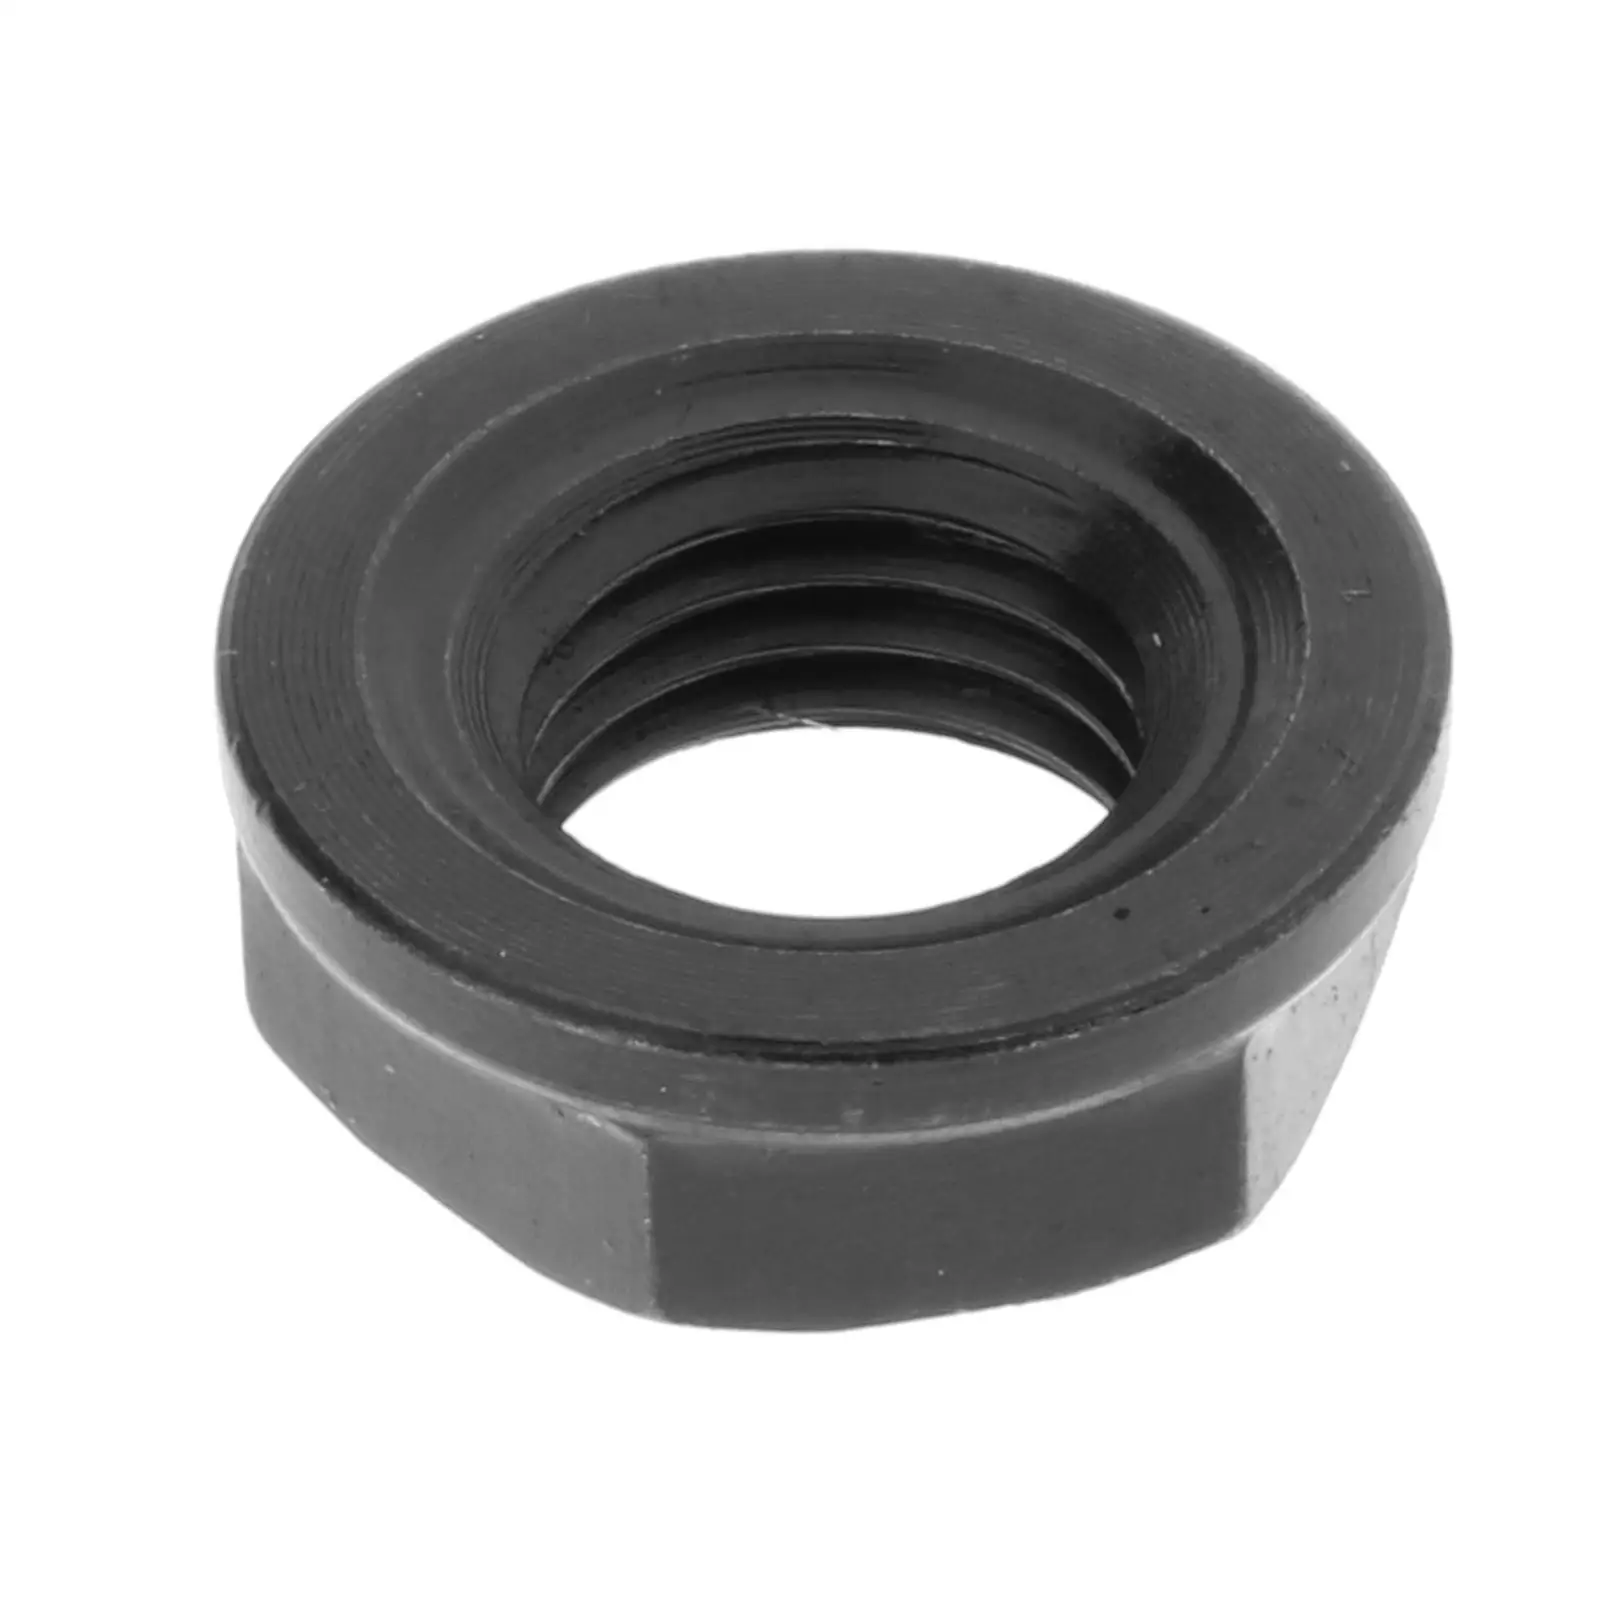 Driver Shaft Nut Suitable for Yamaha Parts Durable Easy and Convenient to Install and Use